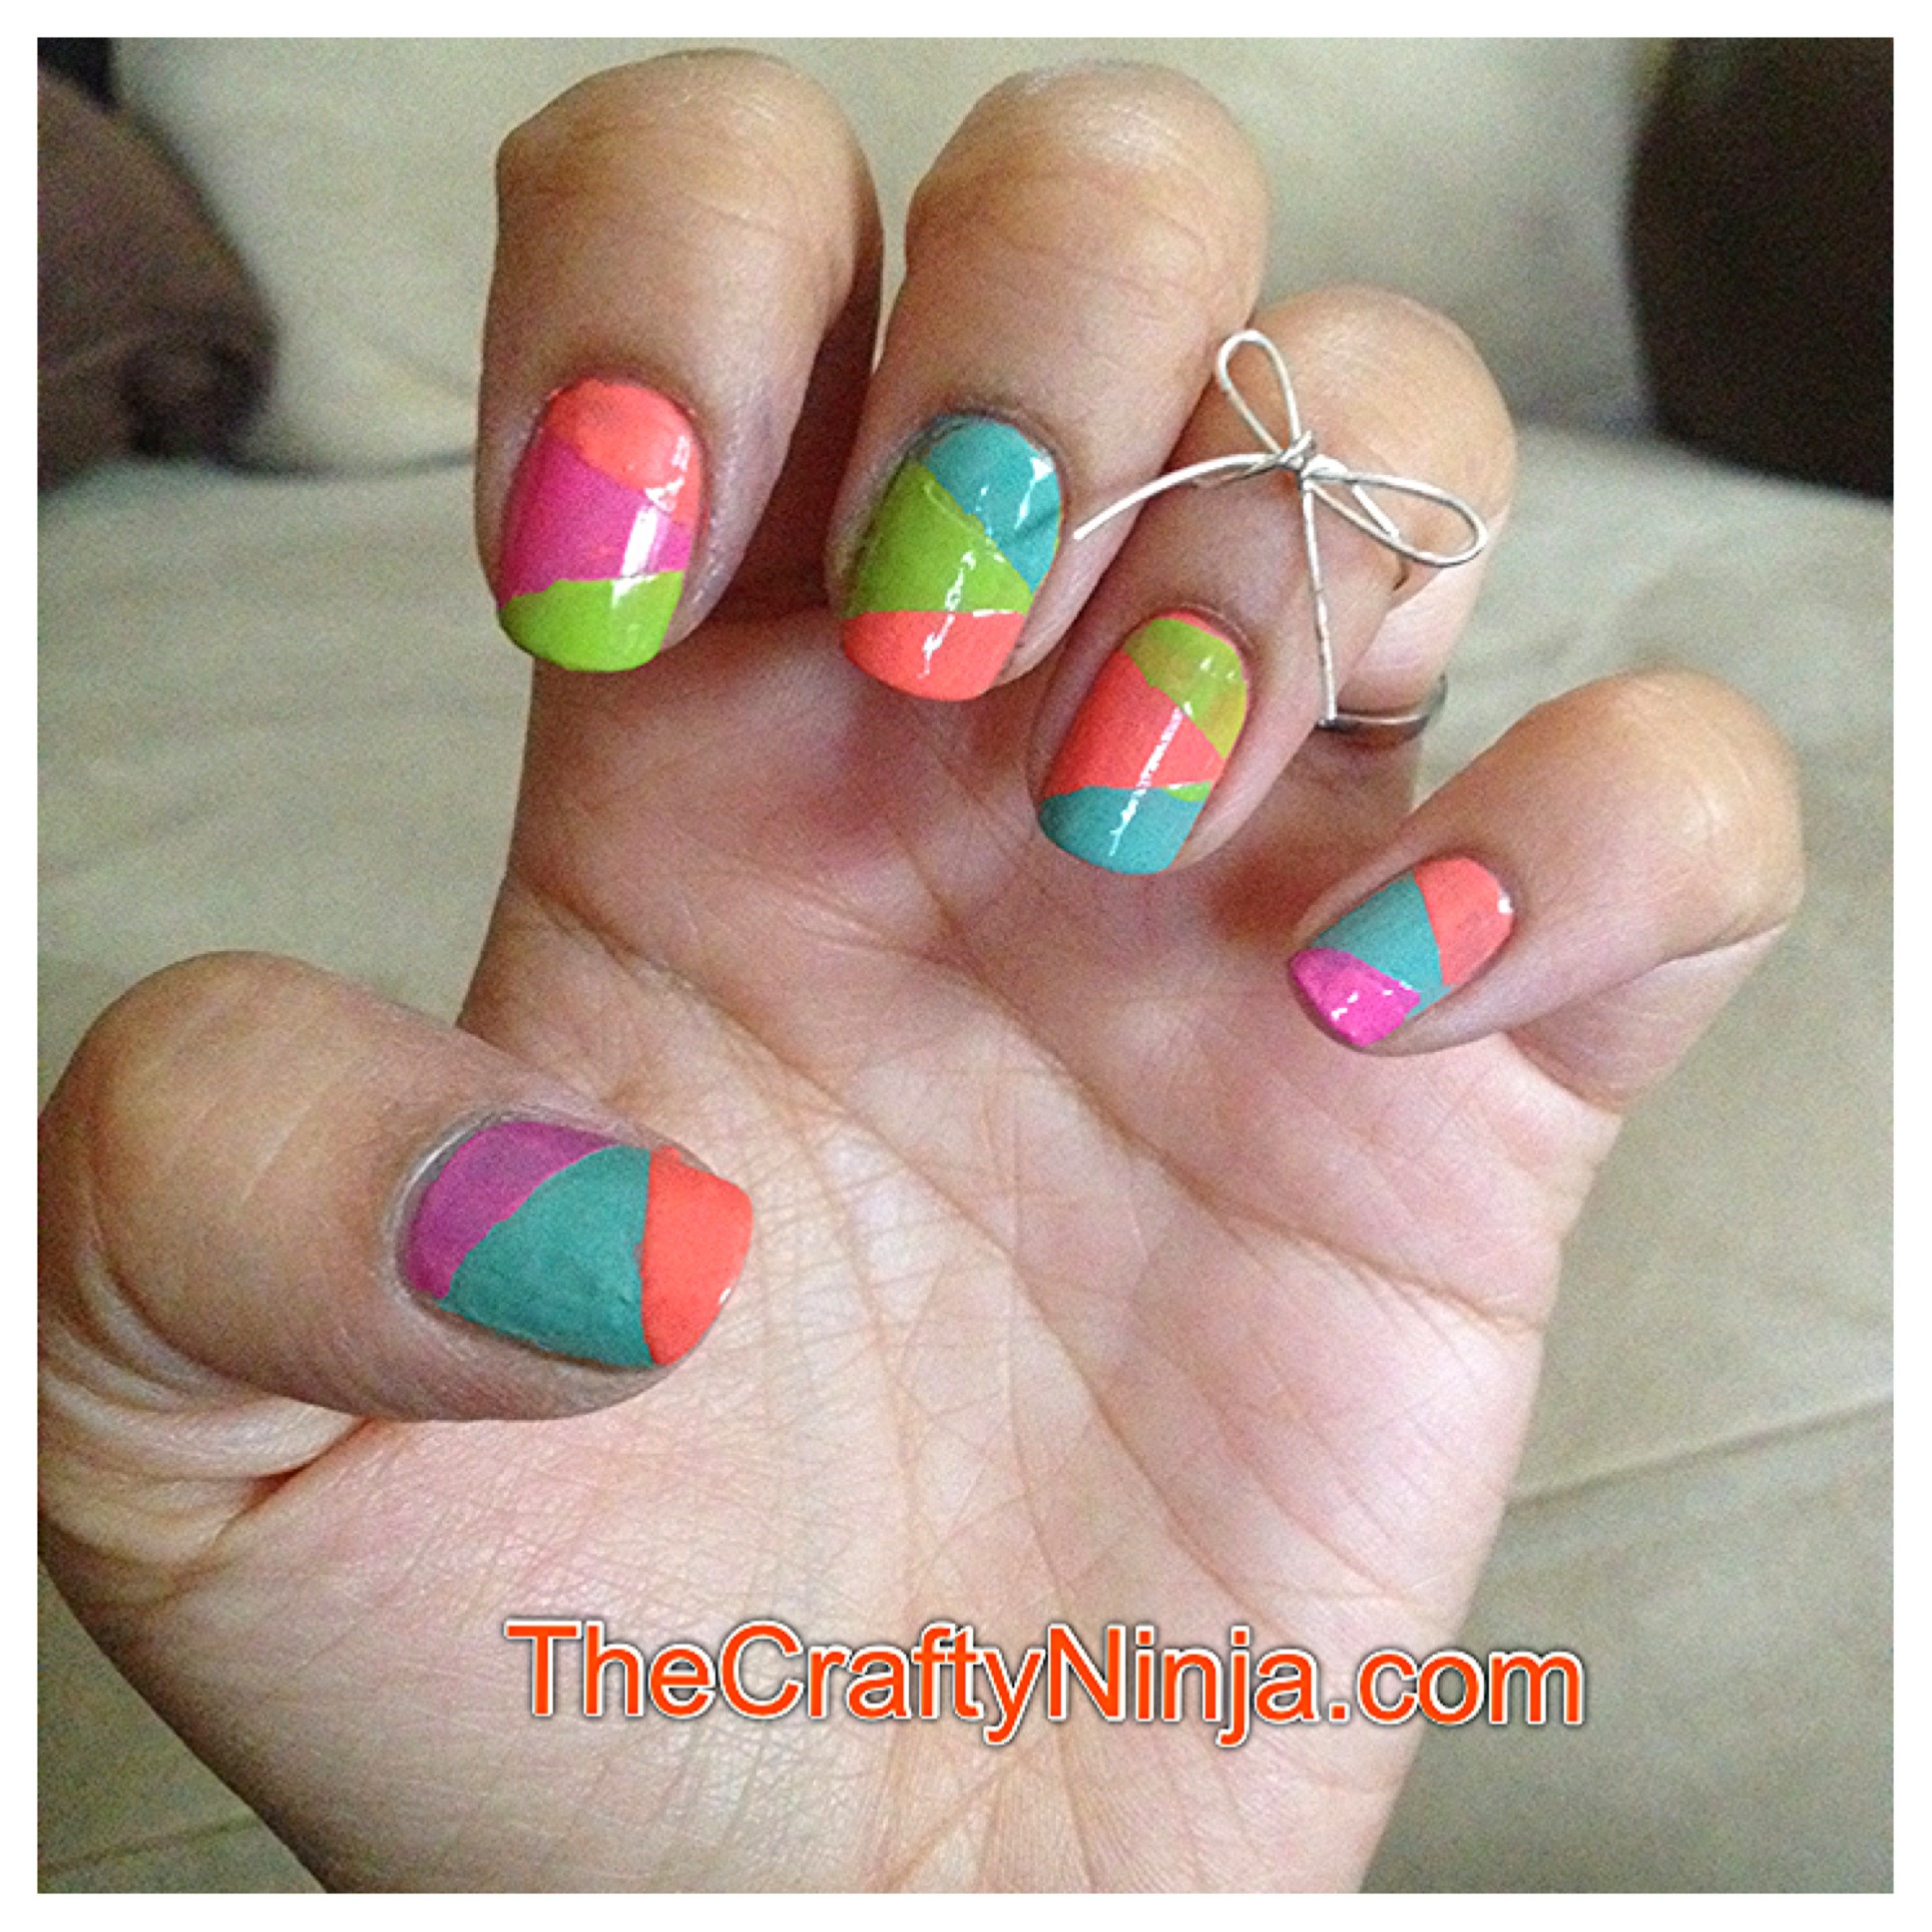 Nail Ideas With Tape
 Scotch Tape Nail Designs